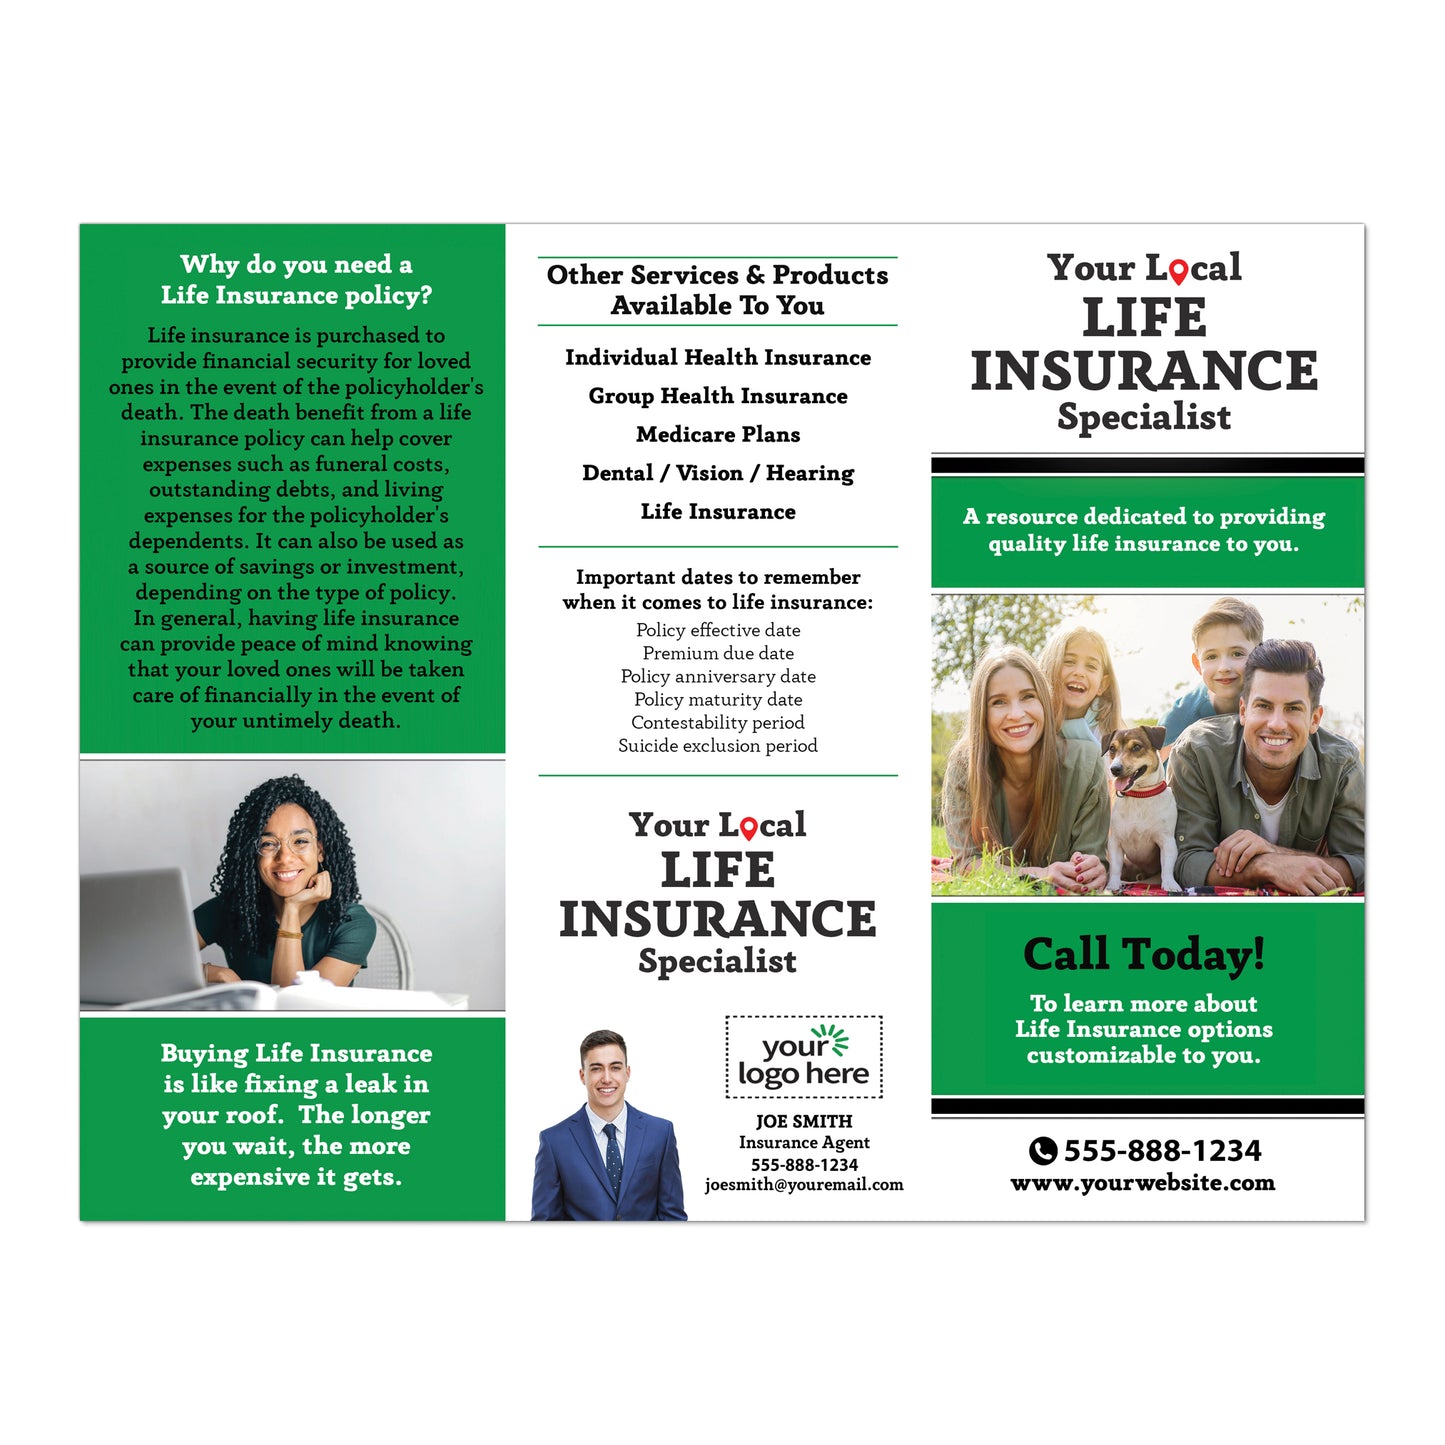 LIFE INSURANCE IN A BOX (STANDARD)